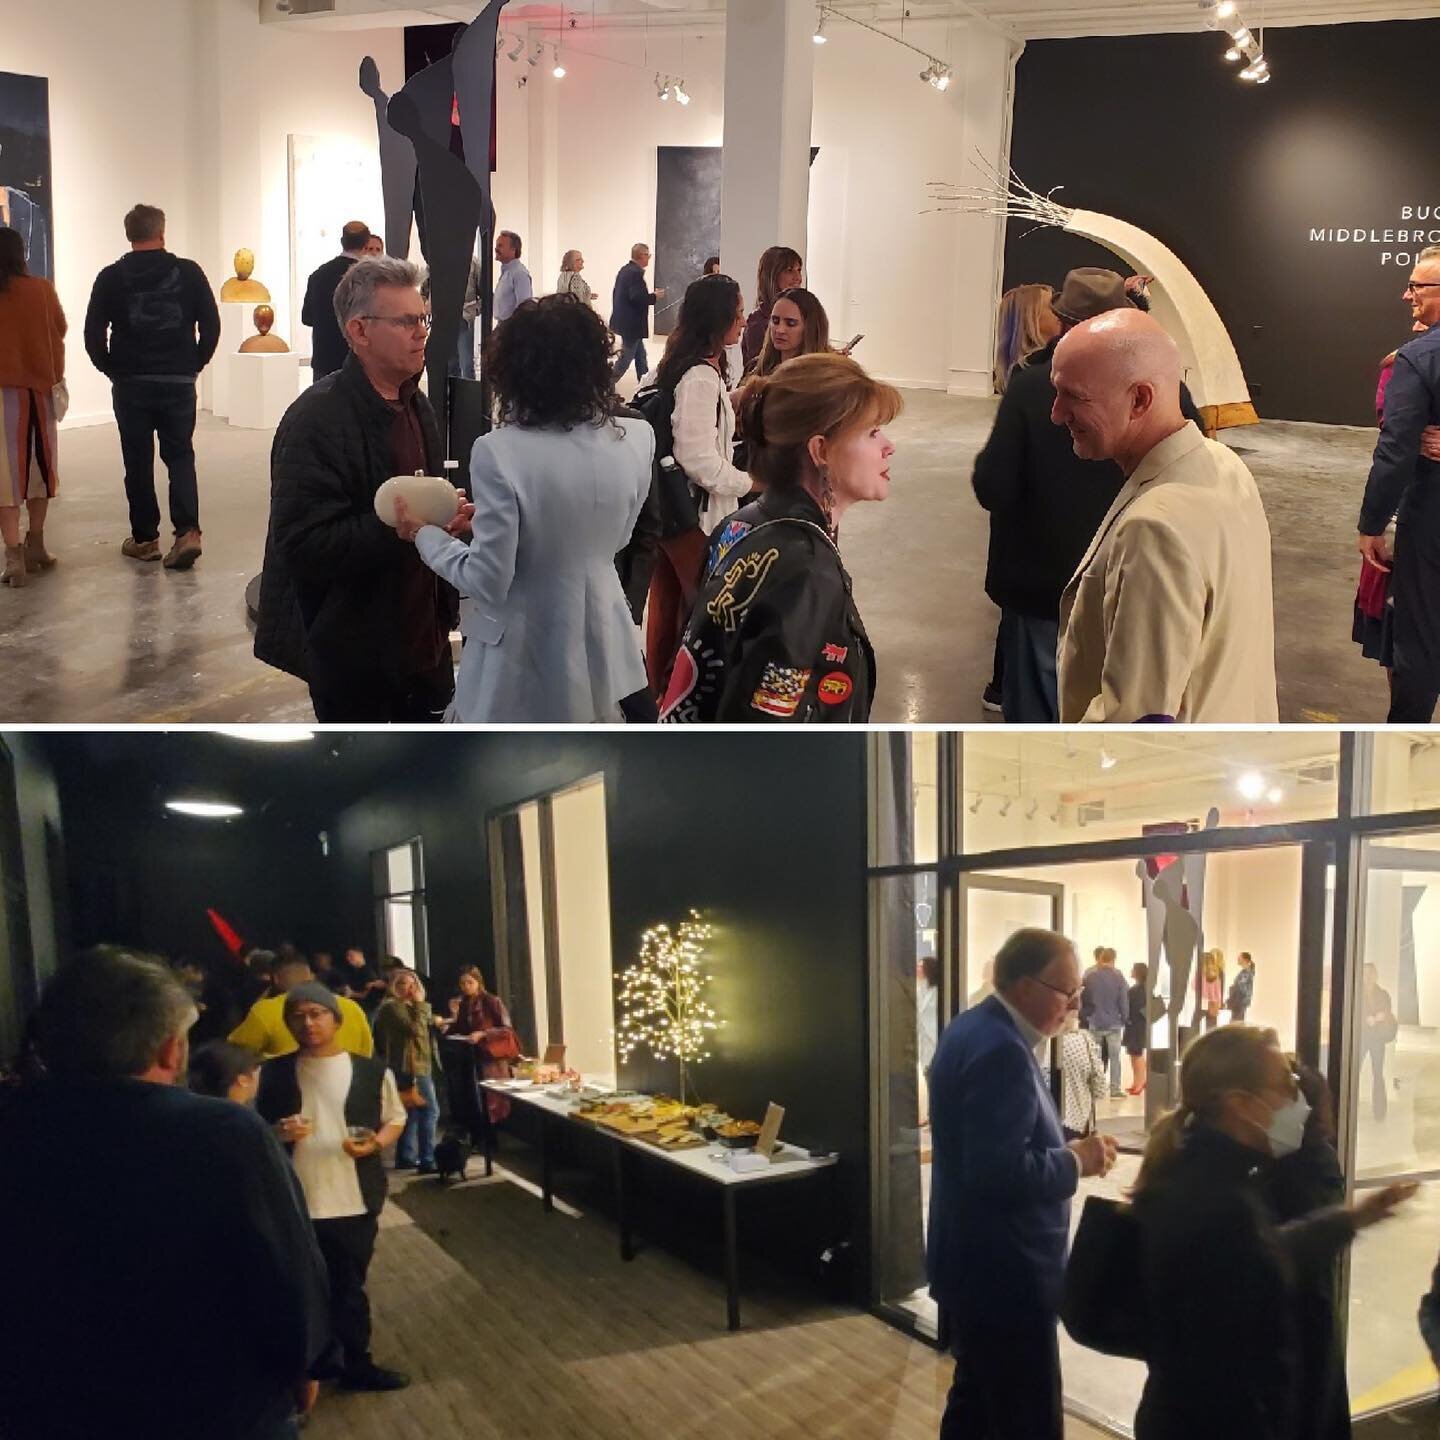 Thank you to all that made it out the the opening reception of Emerging with David Middlebrook, Silvia Poloto, and Yarrow Slaps! I appreciate all of your support and for making it a special evening! A very special thank you to G &amp; Void for making